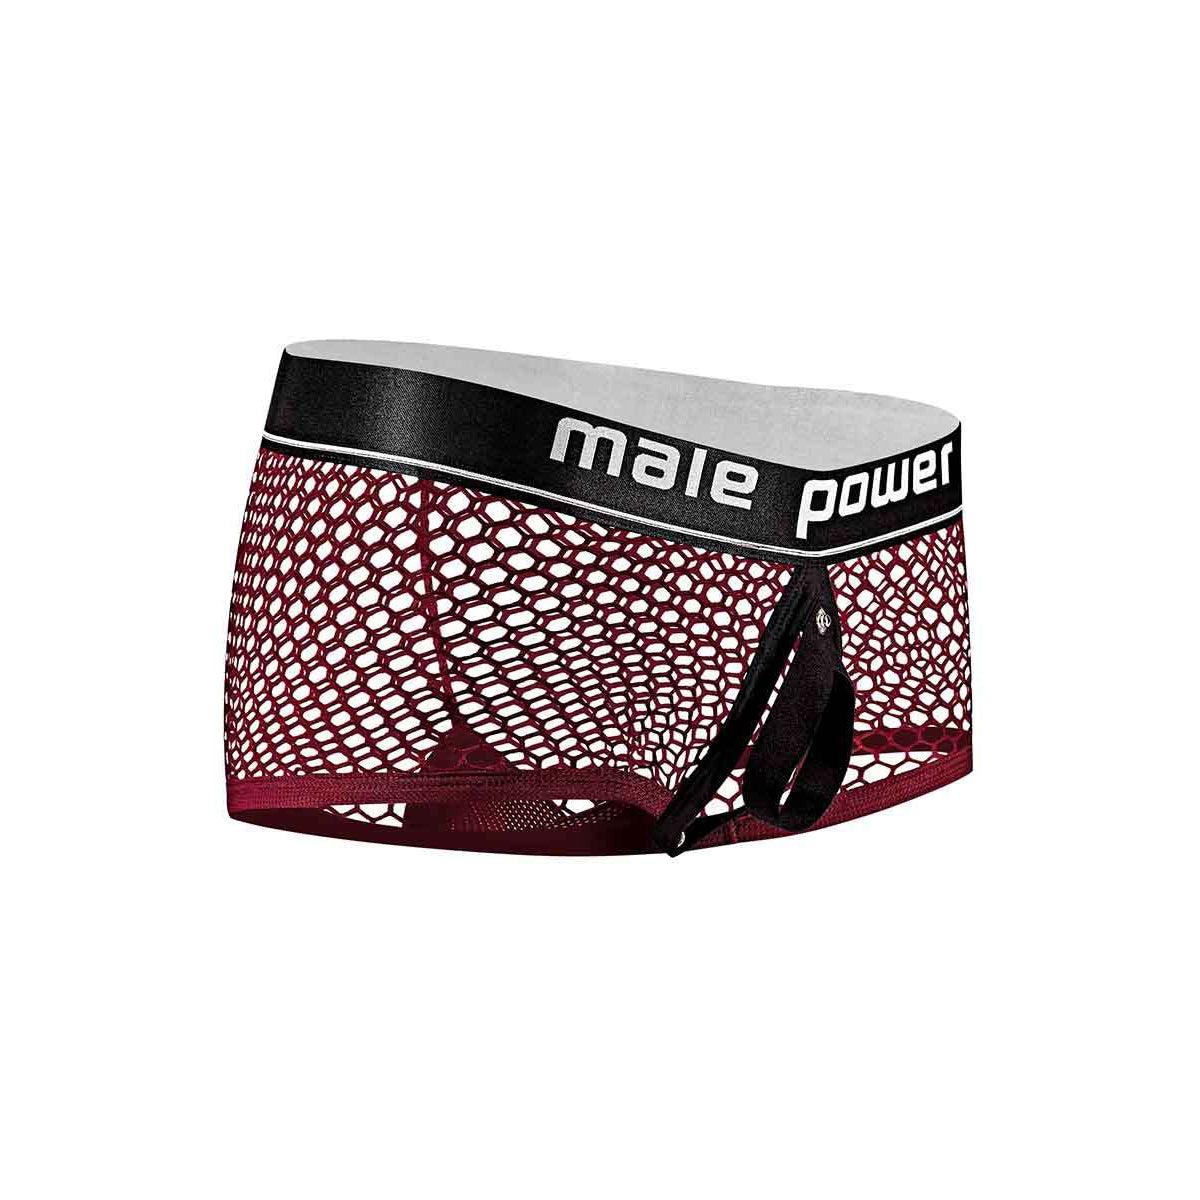 Cock Pit Net Mini Cock Ring Short - Extra Large - Burgundy